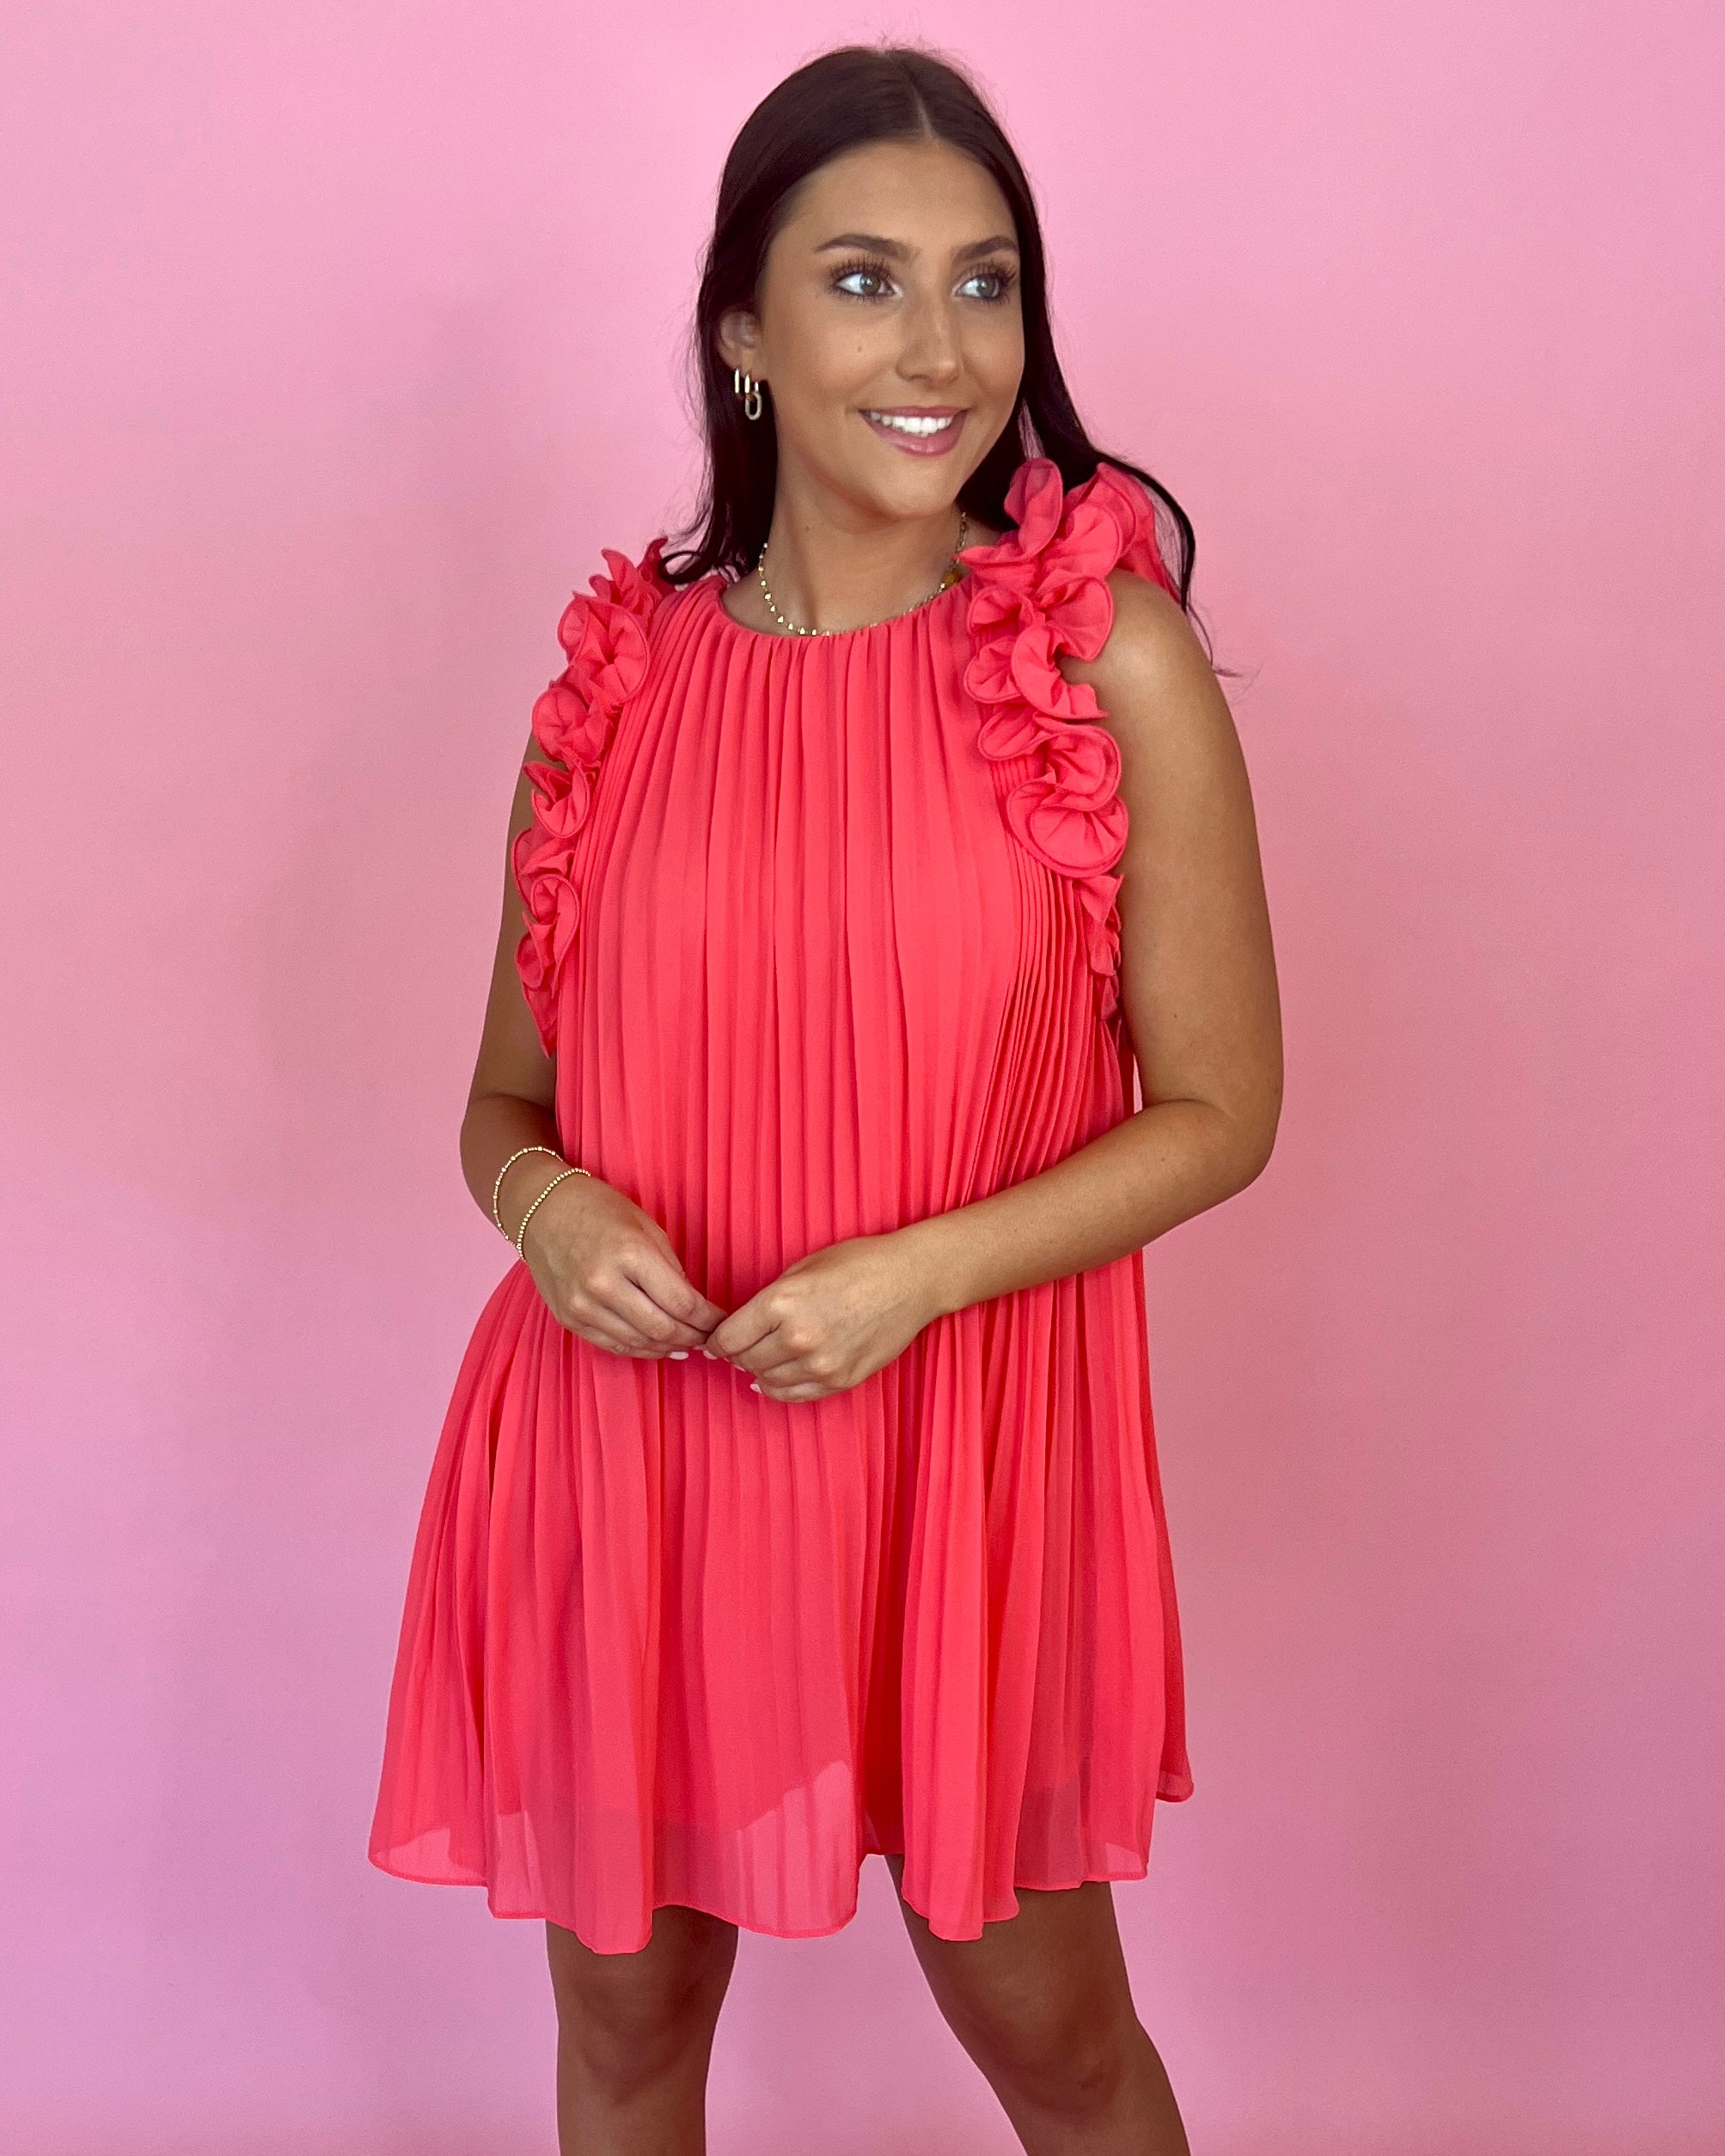 Gonna Be Alright Pink Coral Pleated Dress-Shop-Womens-Boutique-Clothing